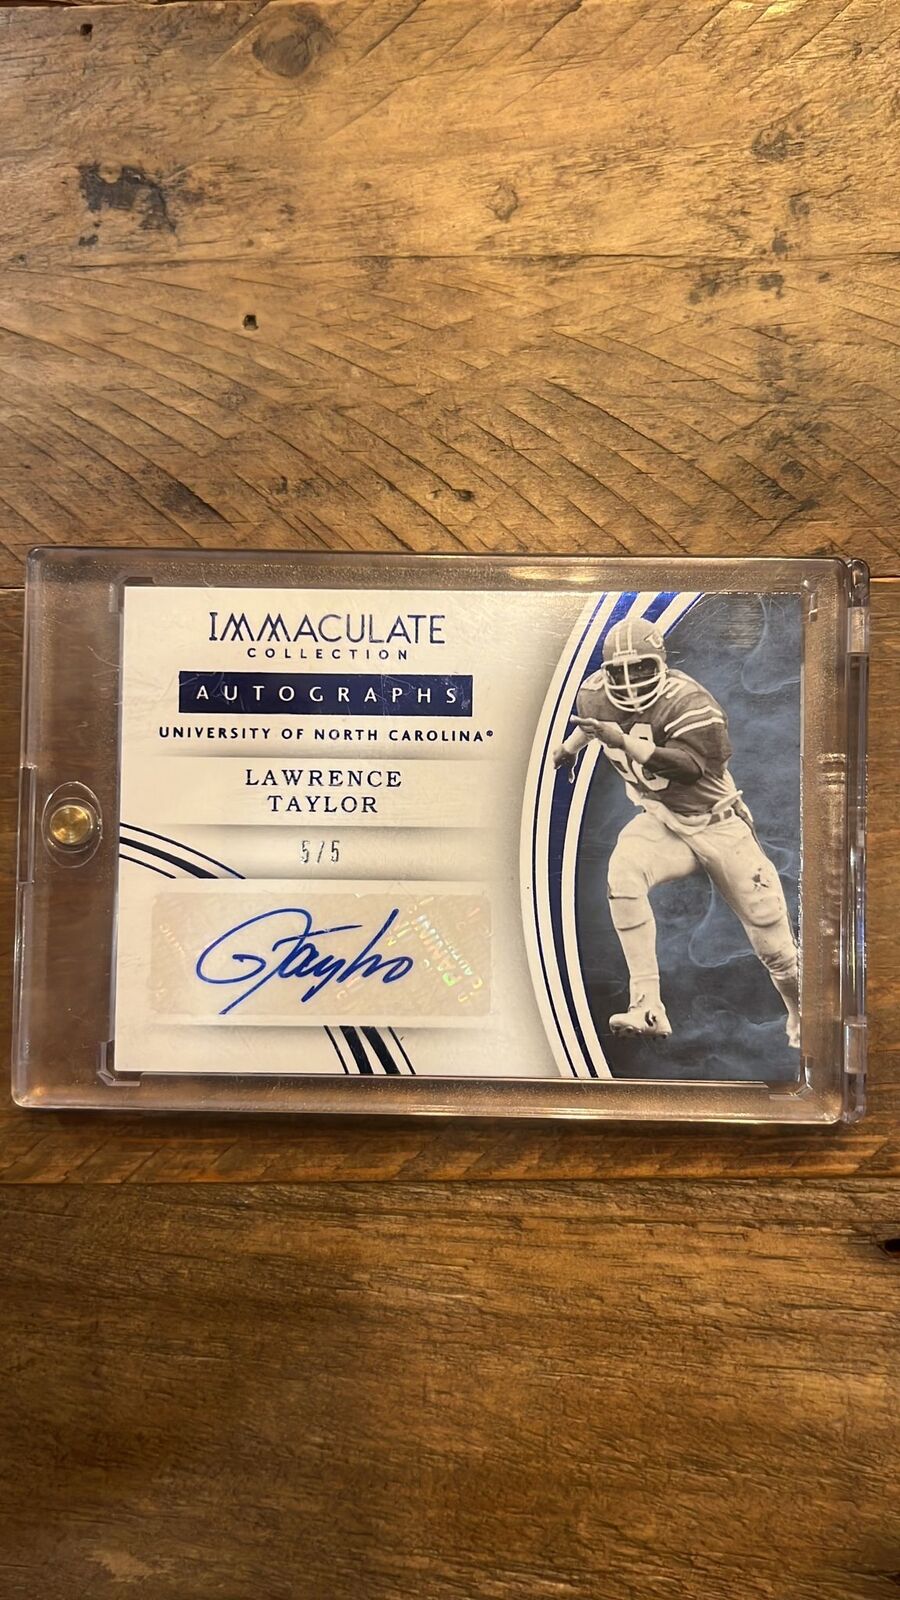 Lawrence Taylor 5/5 Auto 2016 Immaculate Collection College HOF NY Giants